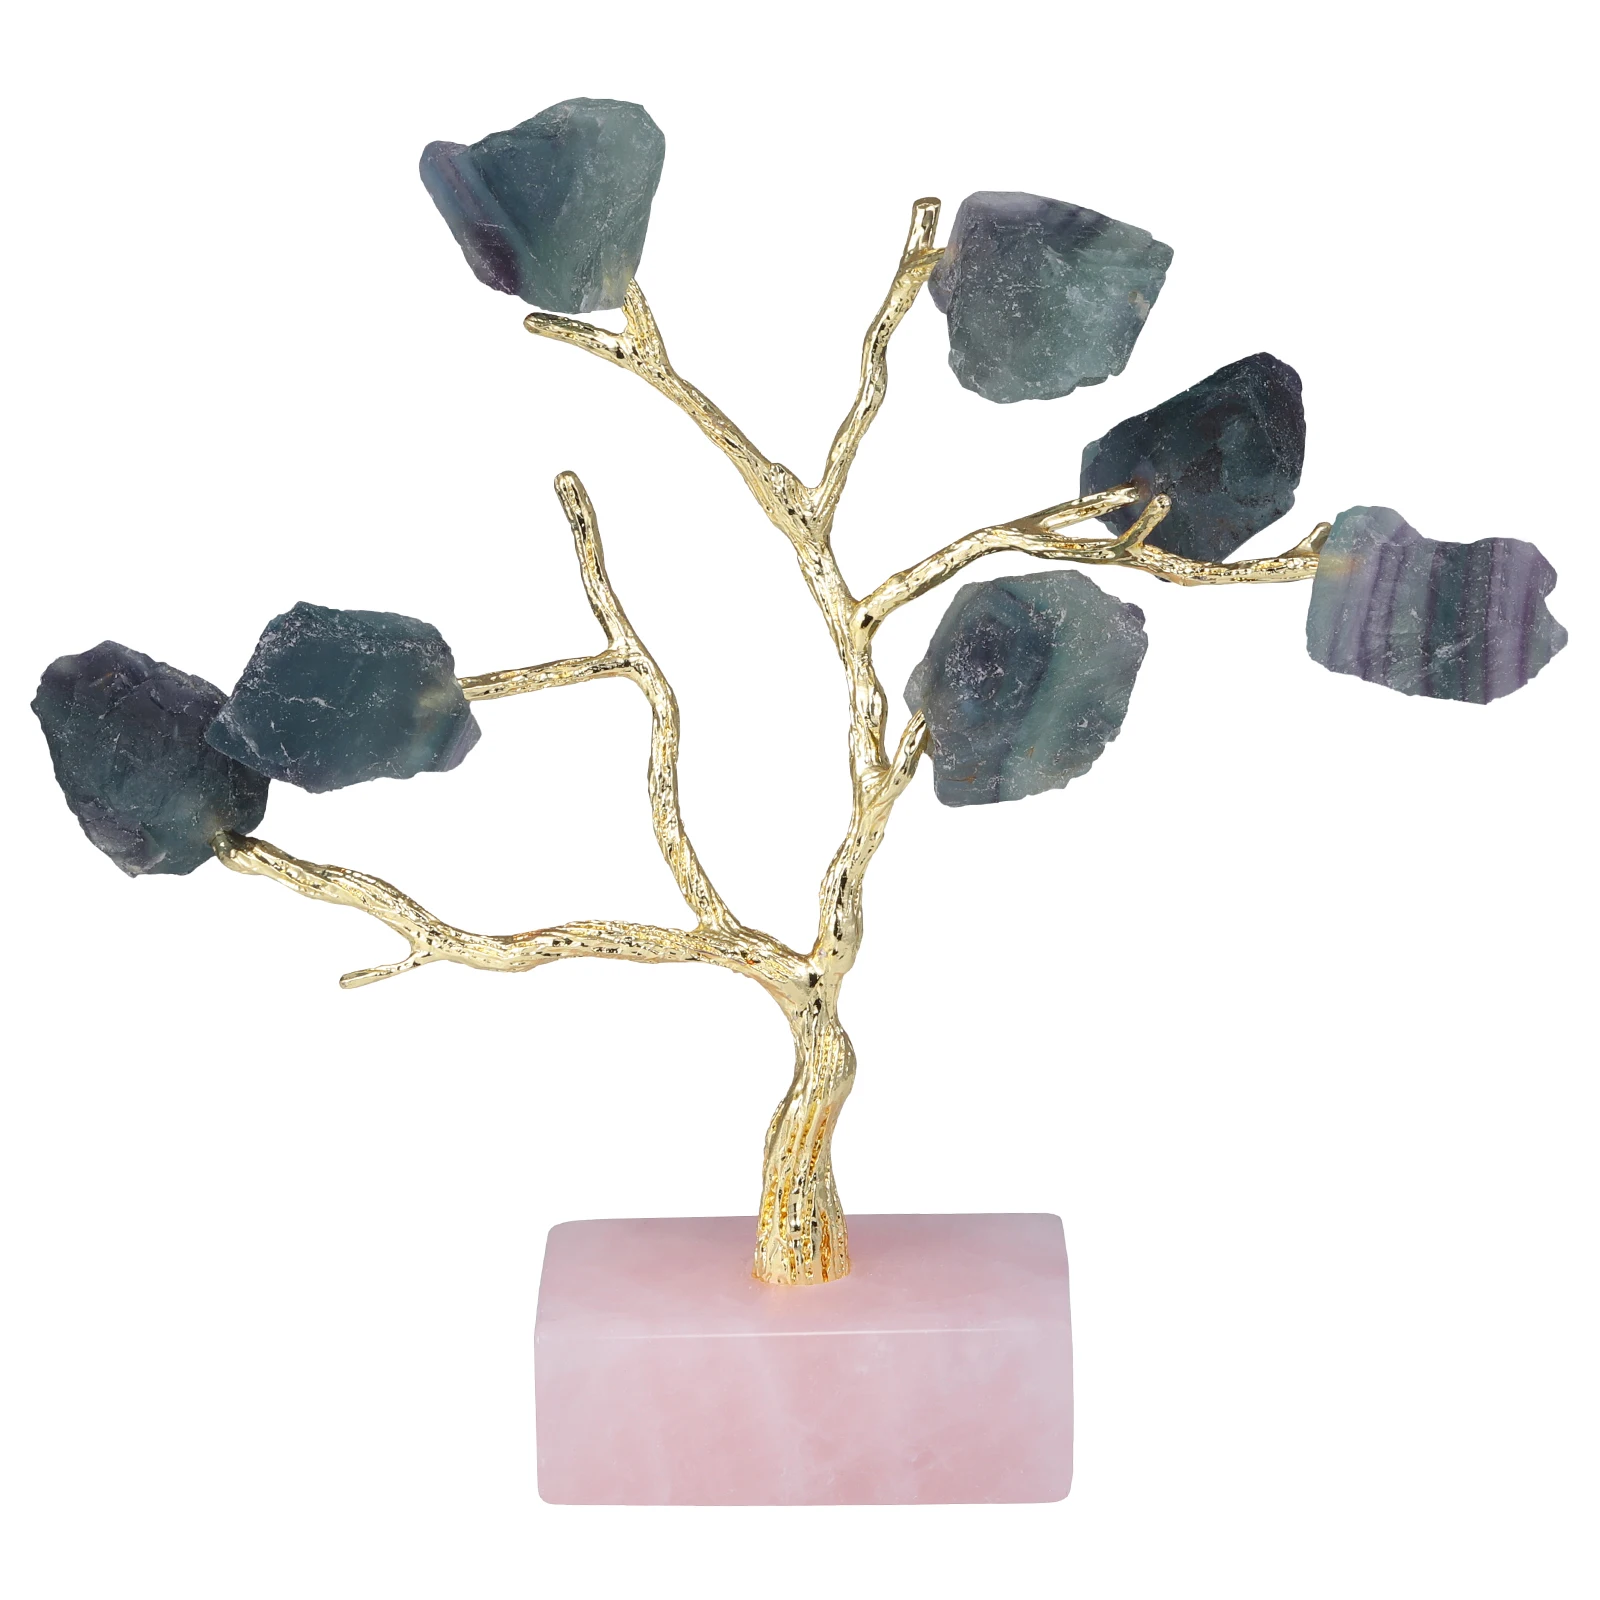 Natural Rough Crystal Stone Tree With Rose Quartz Base Healing Gemstone Golden Tree For Jewelry Organizer Home Table Decoration natural amethyst rough crystal stone drawer knobs cupboard wardrobe cabinet door pull handles with screws home decoration